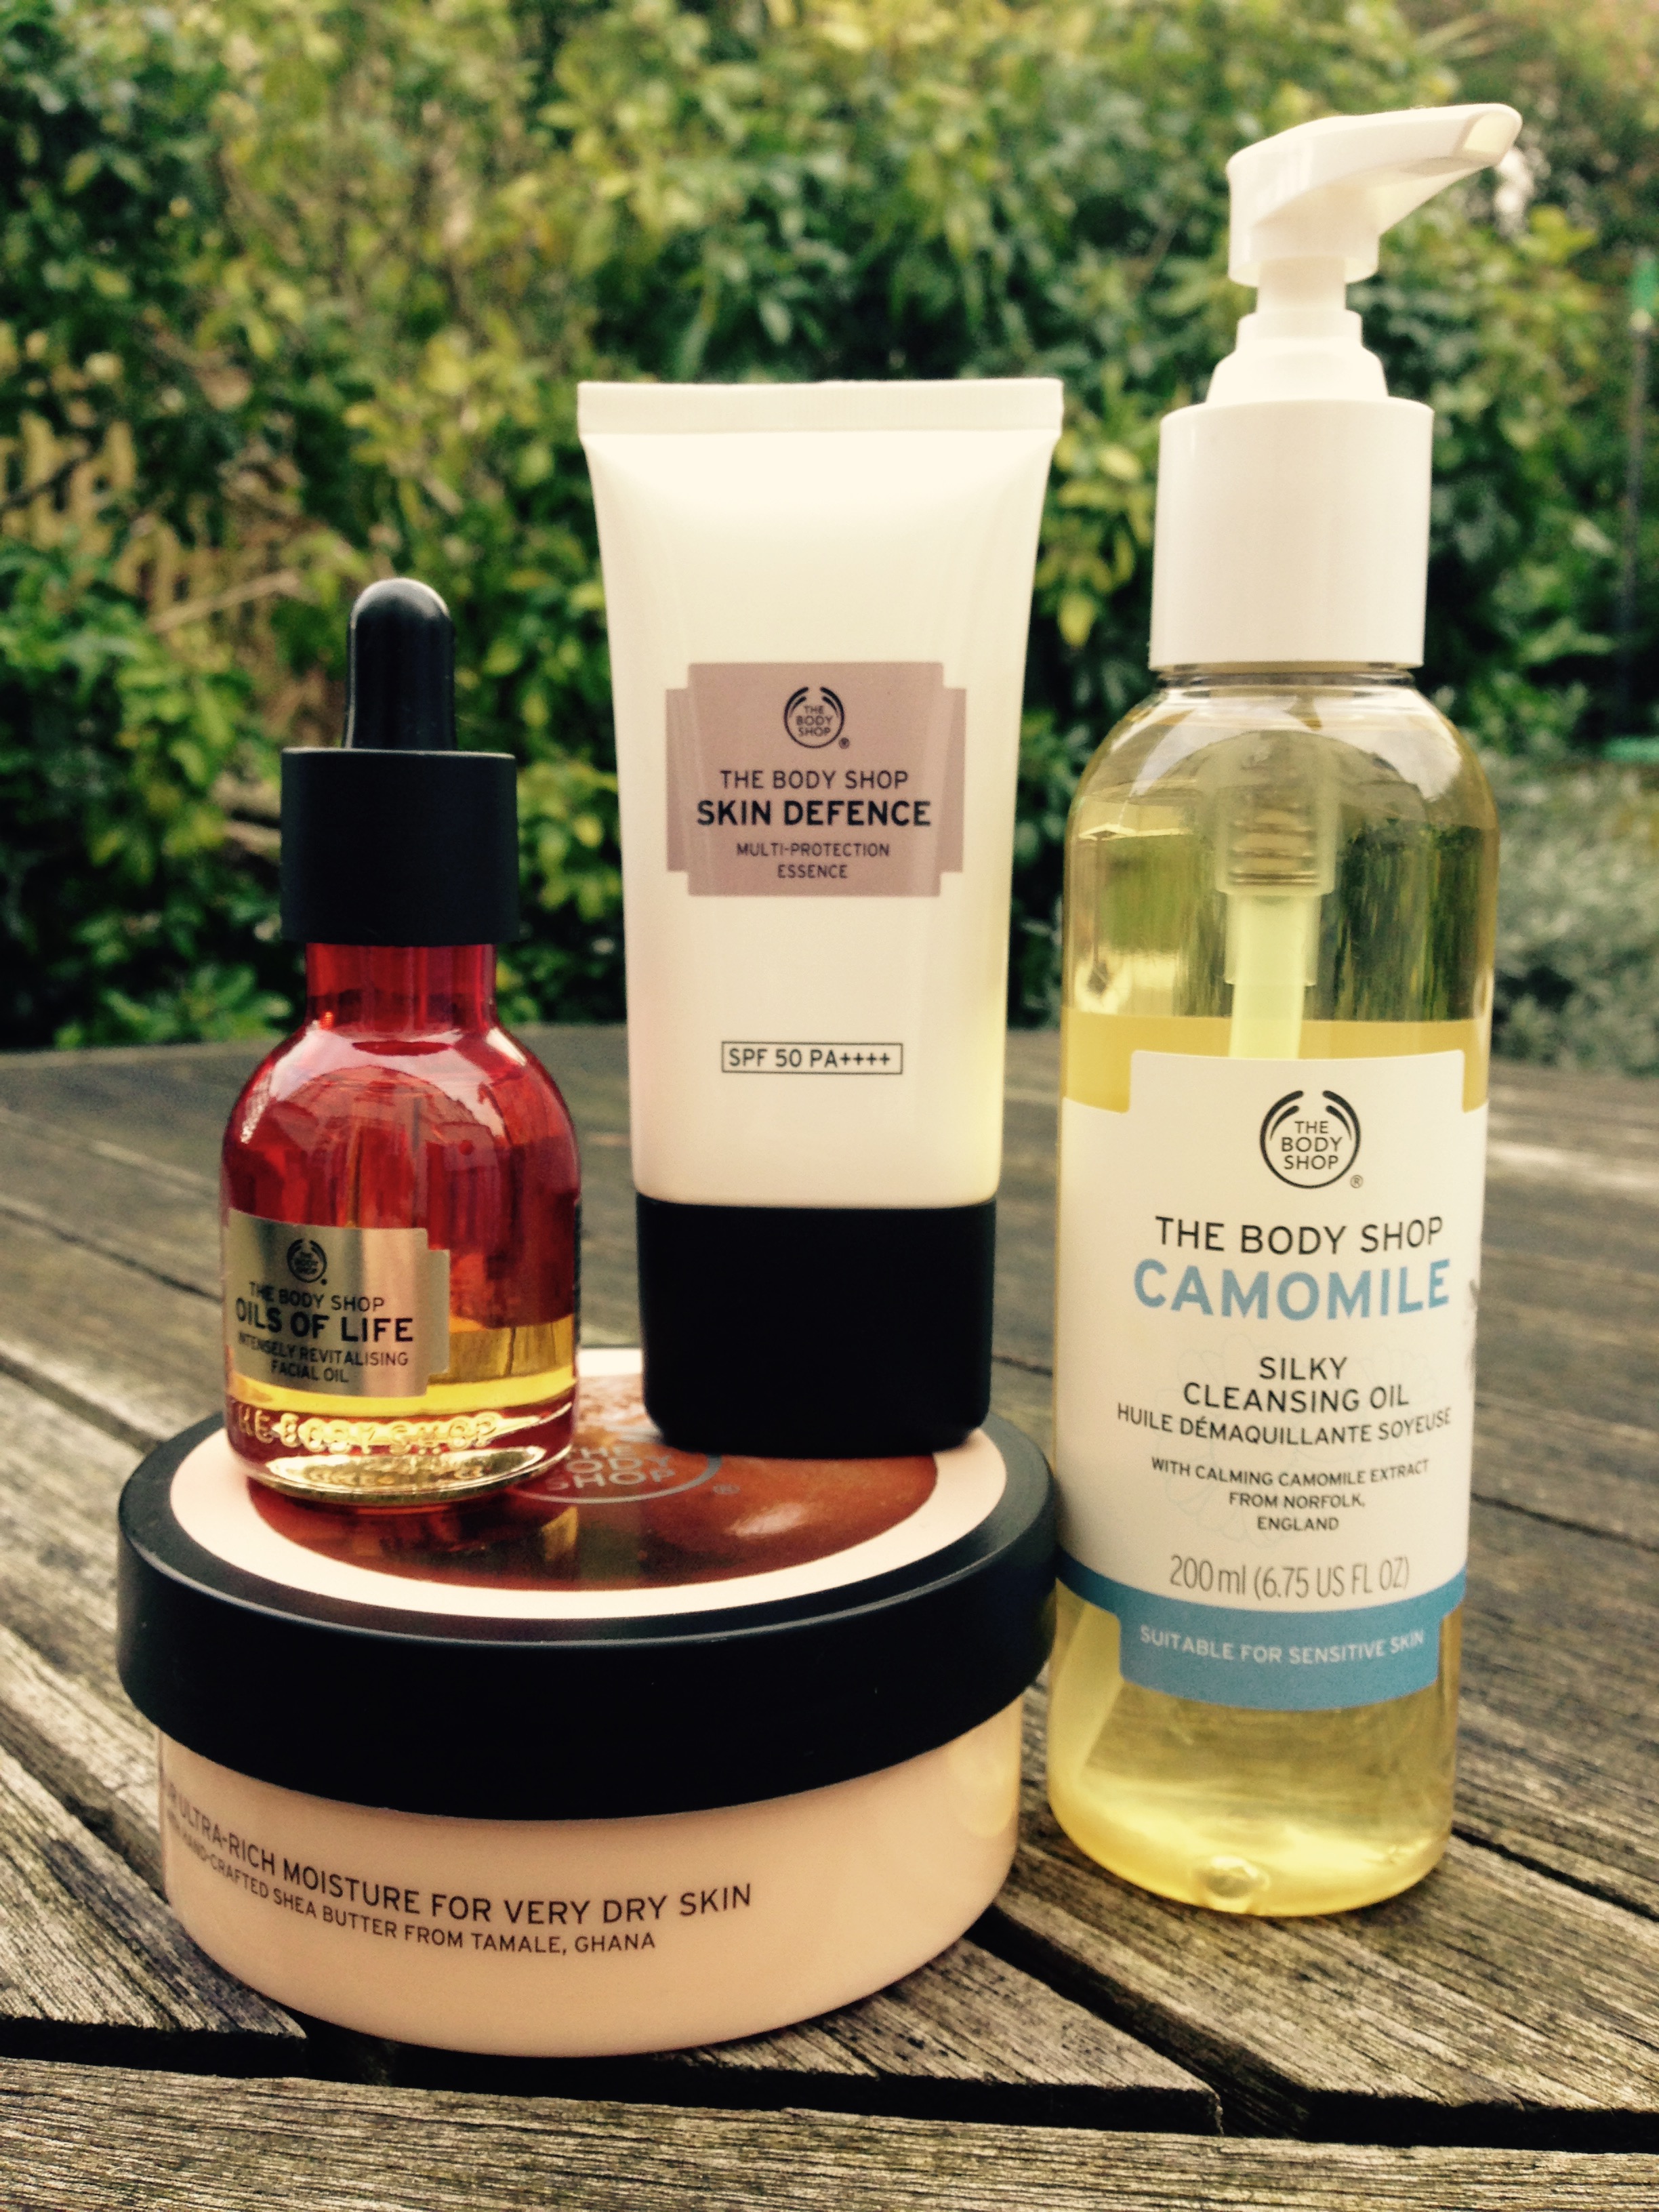 Giveaway Win a Body Shop skincare bundle worth £73